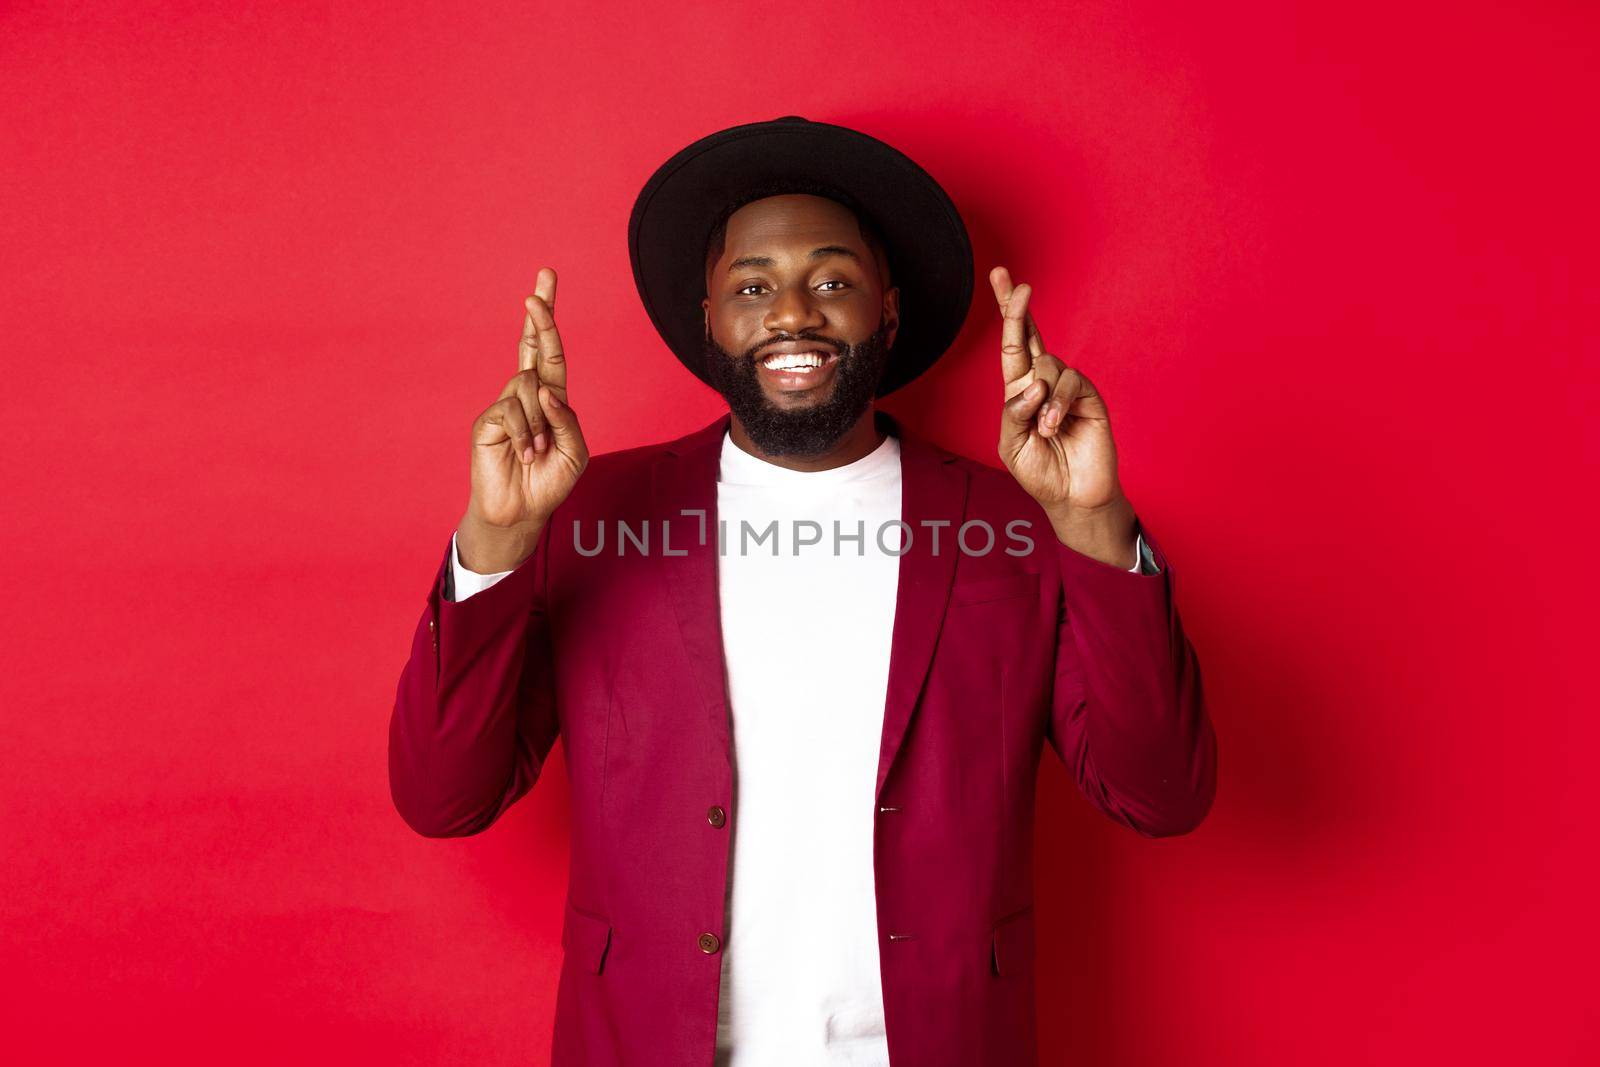 Hopeful african american man making wish, holding fingers crossed for good luck and smiling optimistic, standing against red party background.